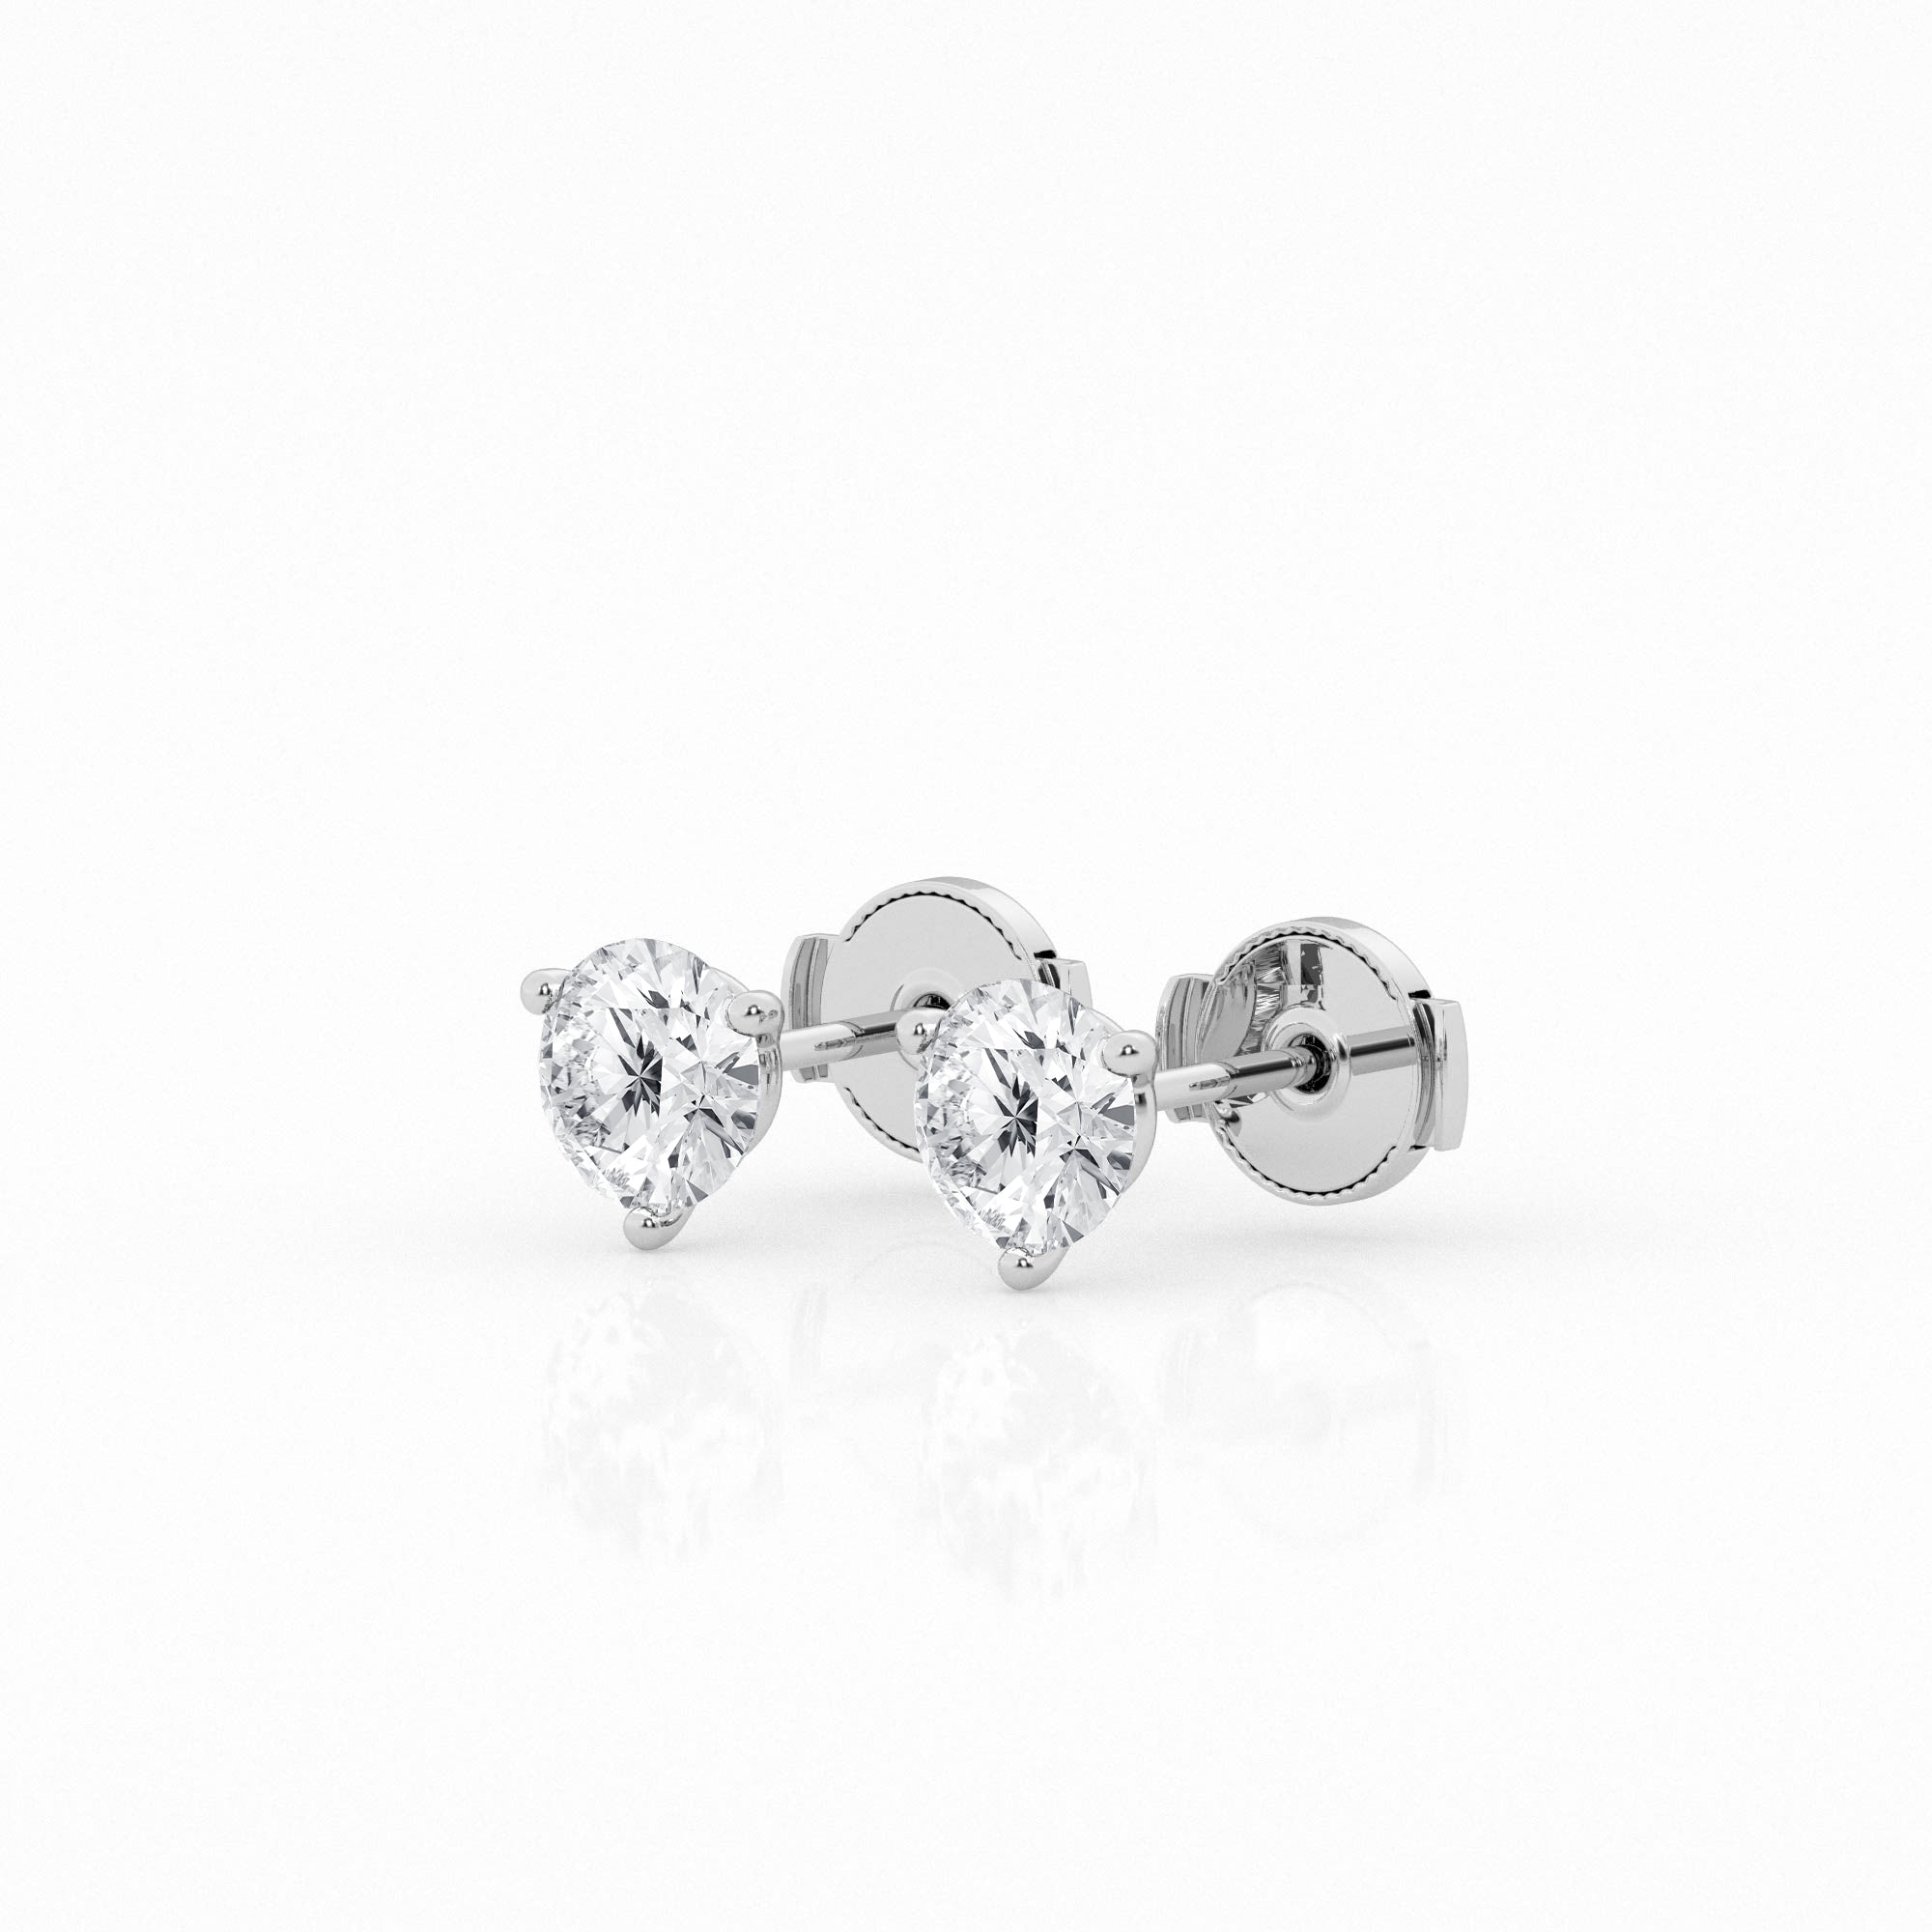 White gold stud earrings featuring 1.5 carat lab-grown round diamonds, side view